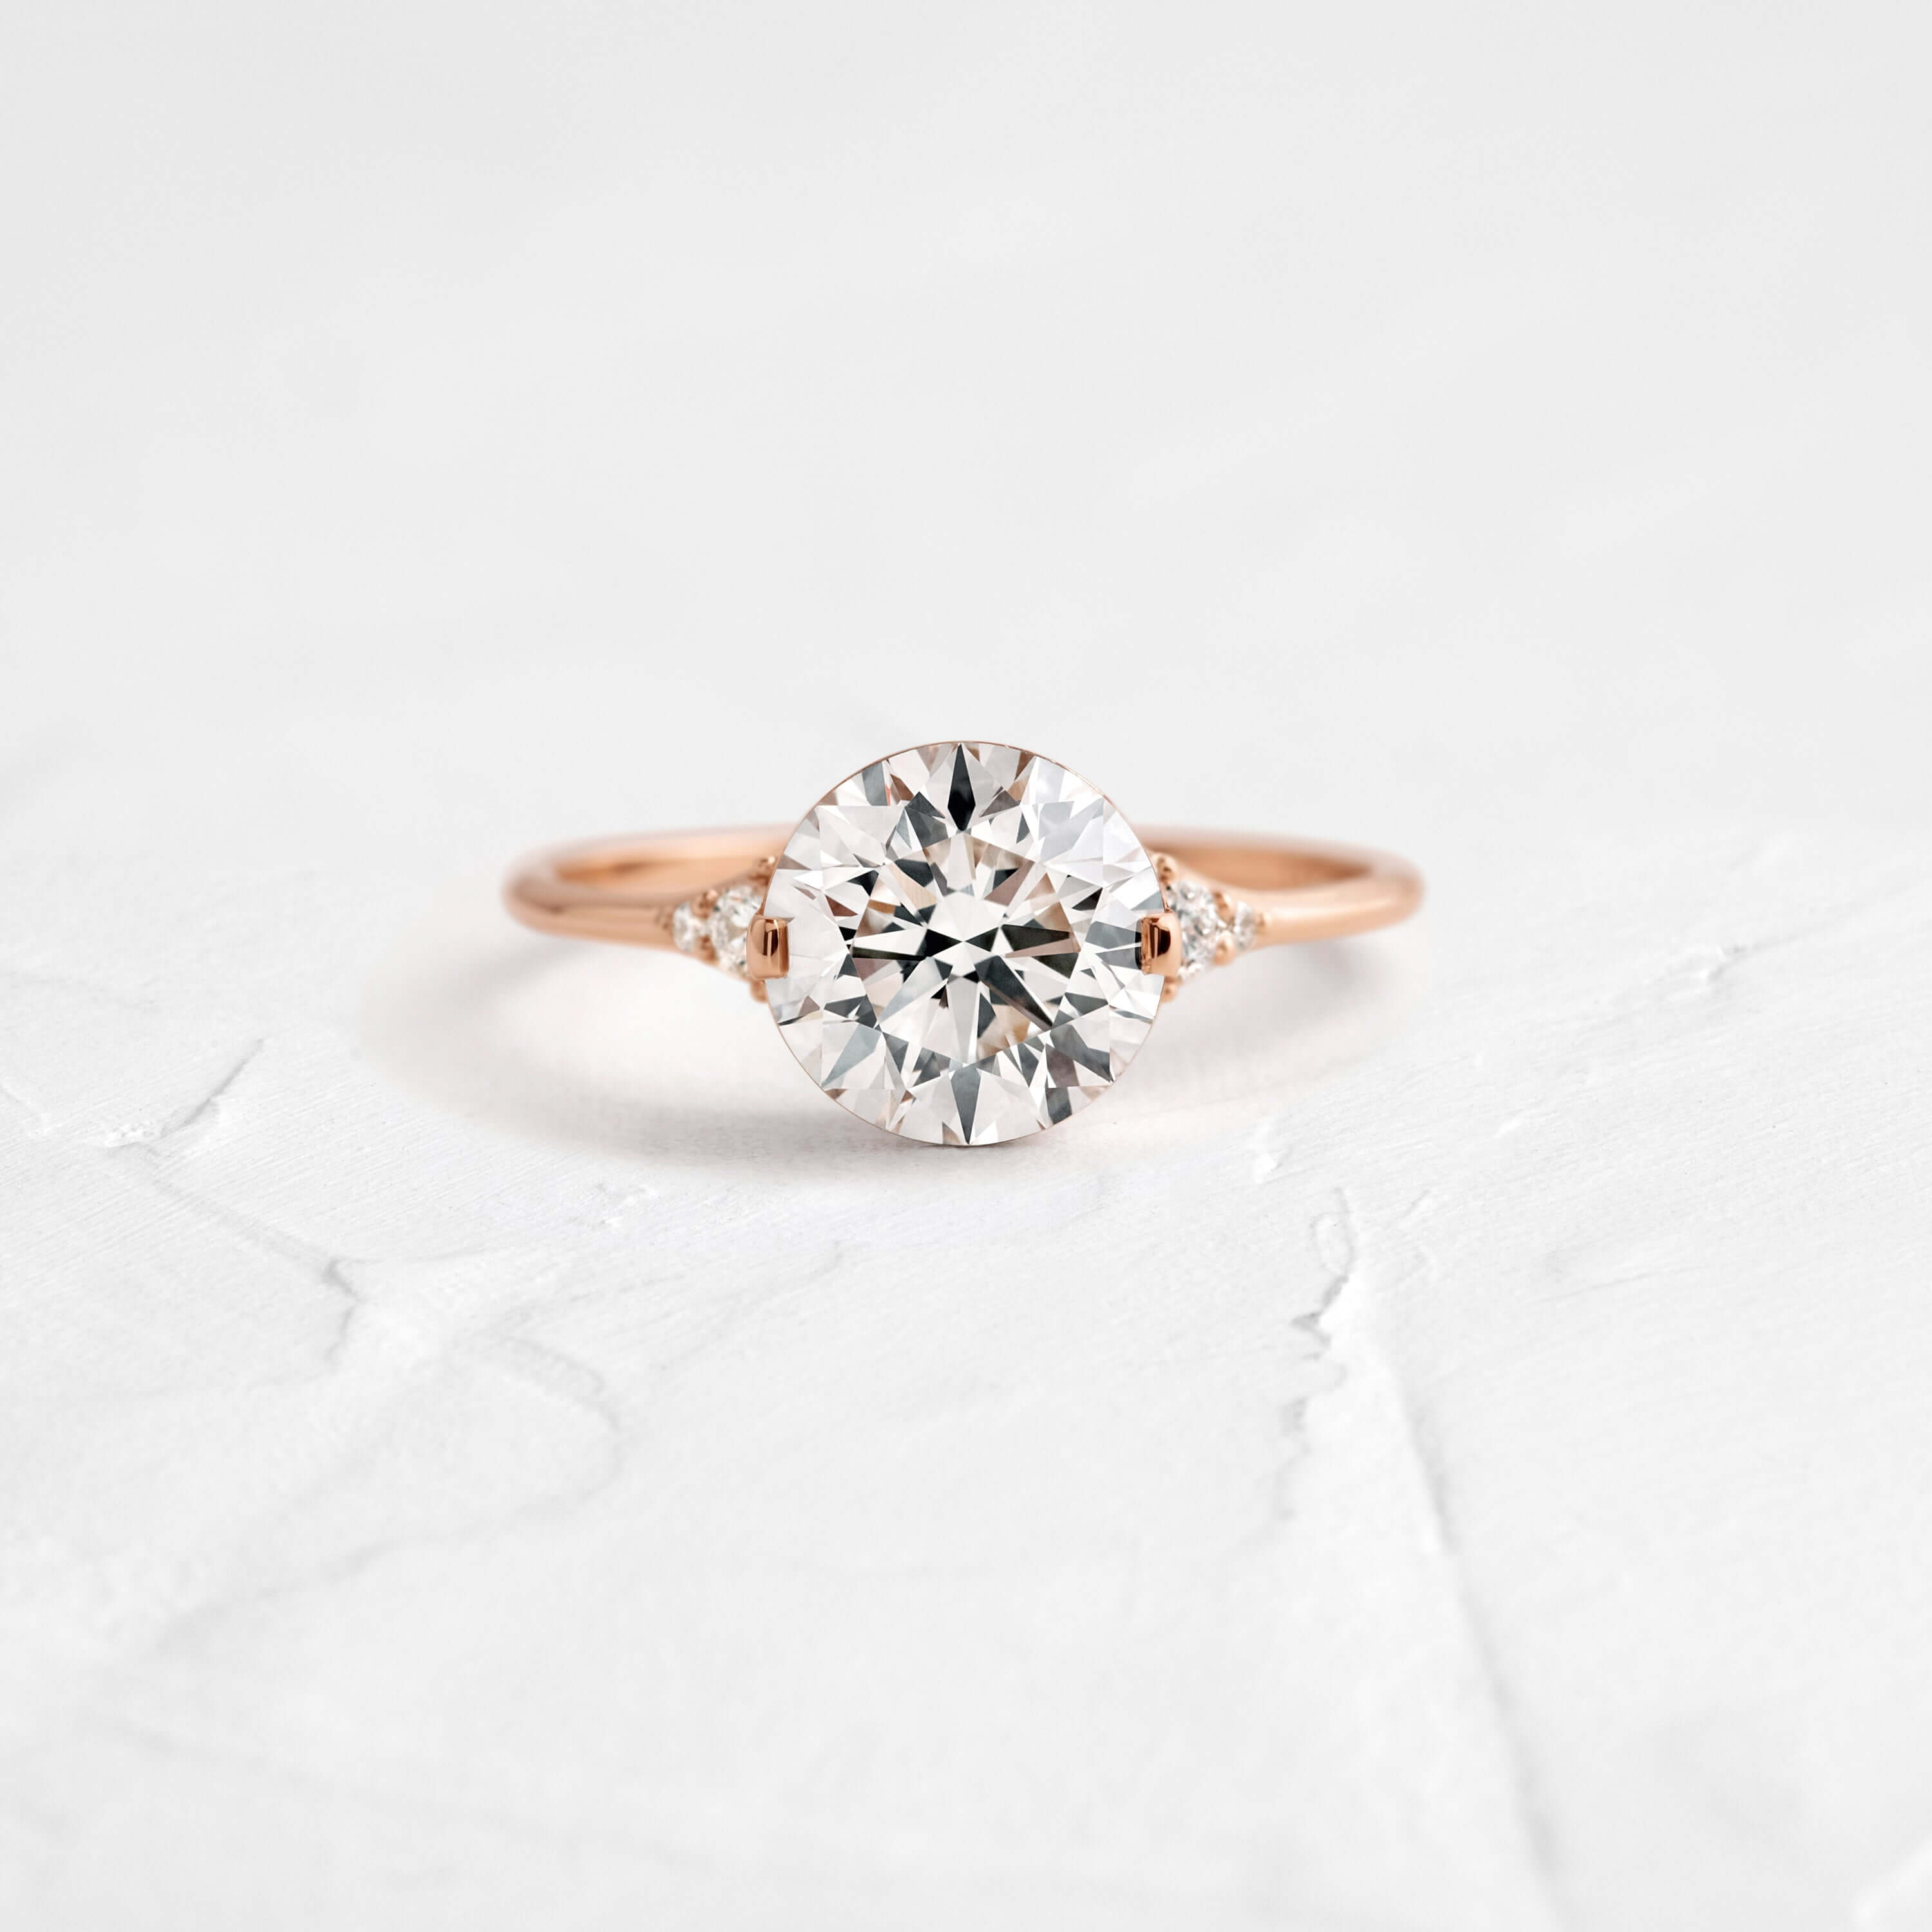 Lady's Slipper Ring | Engagement Ring by Melanie Casey Fine Jewelry